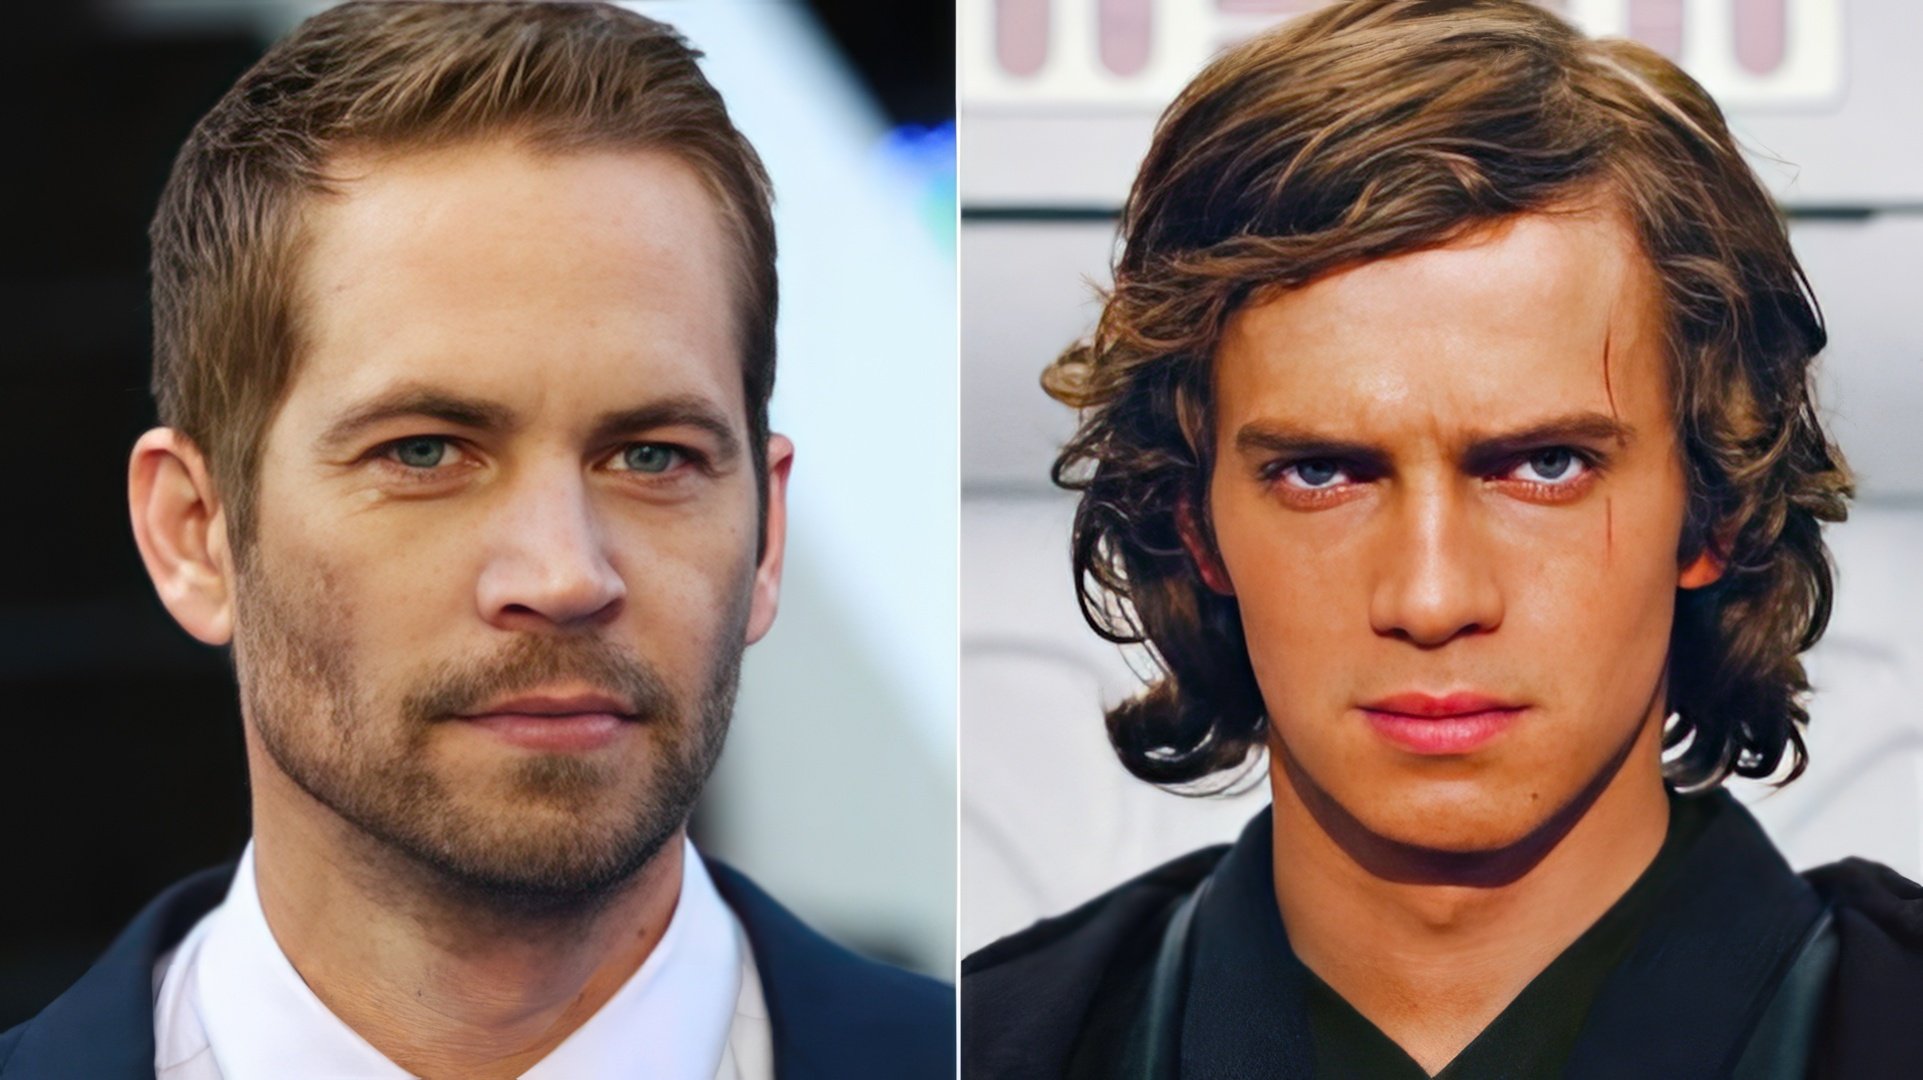 Paul Walker auditioned for the role of Anakin Skywalker